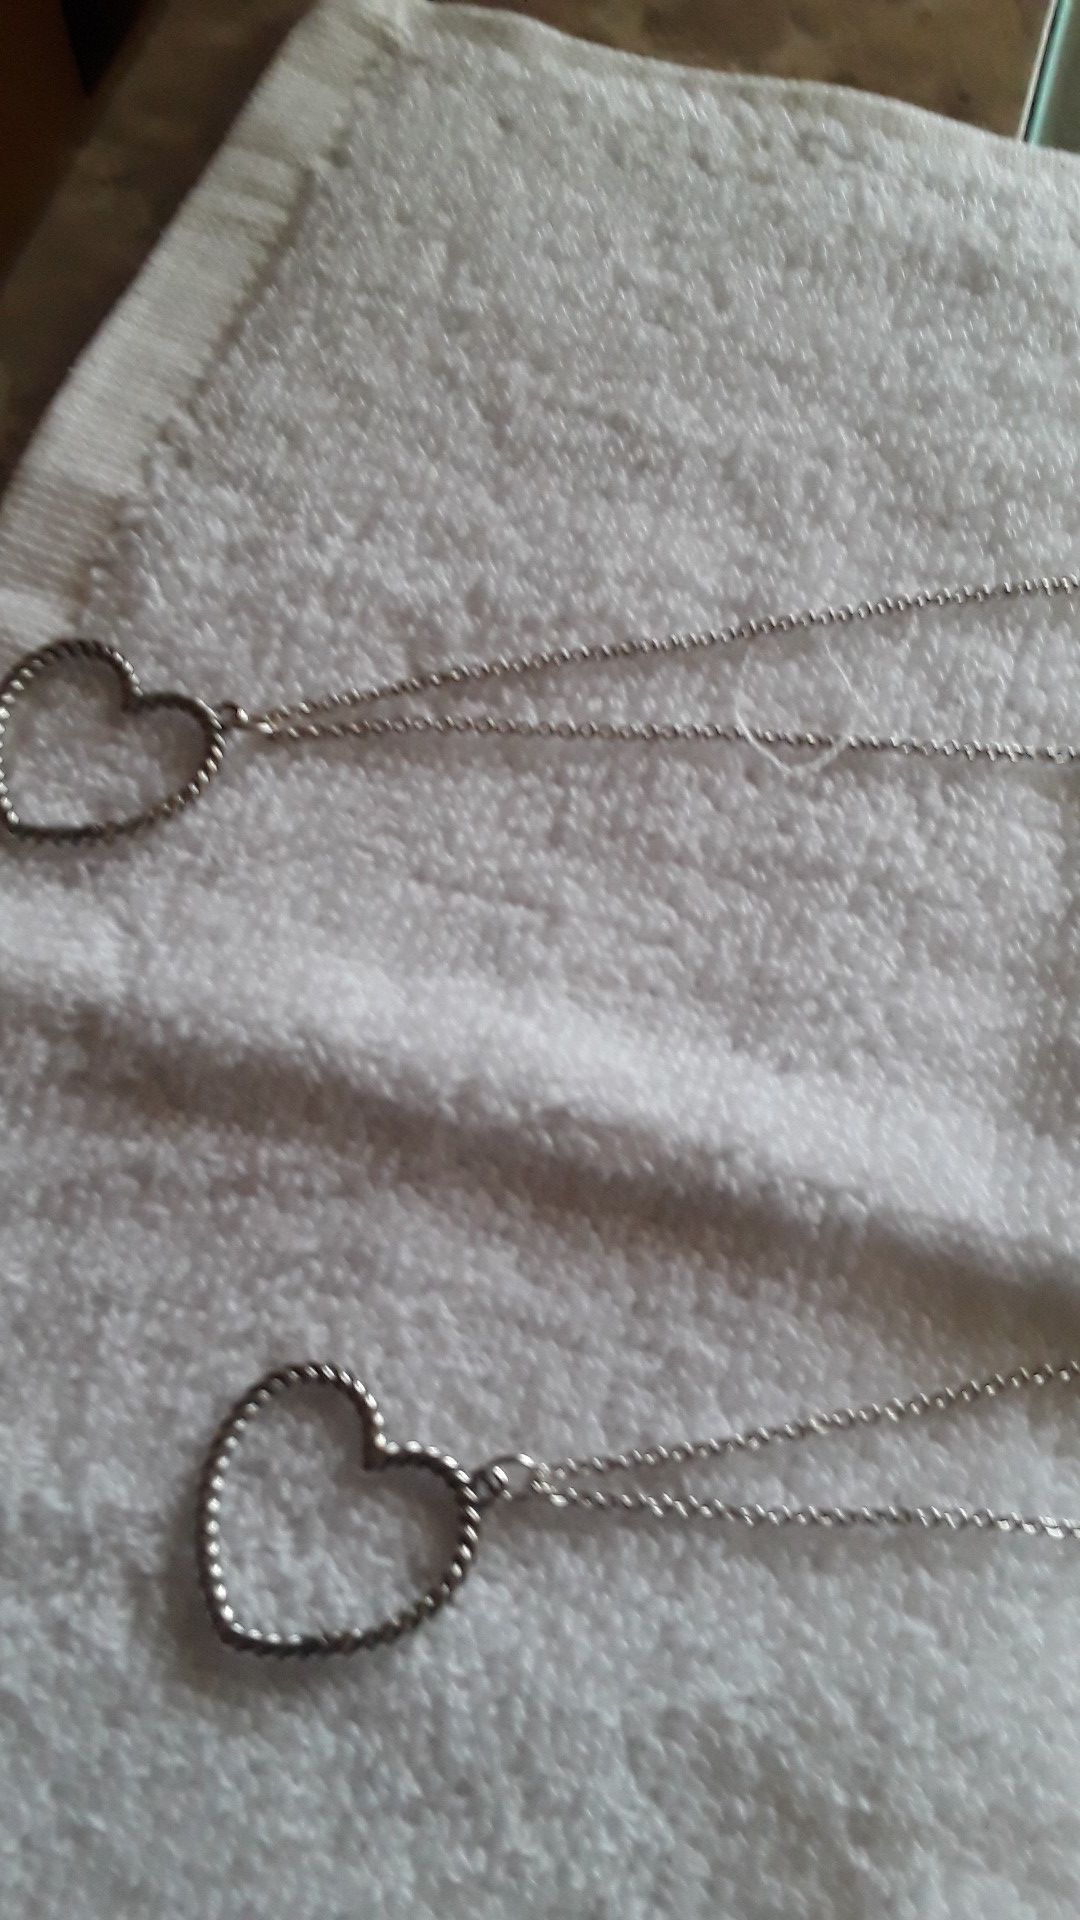 James Avery changeable heart charm holder necklace